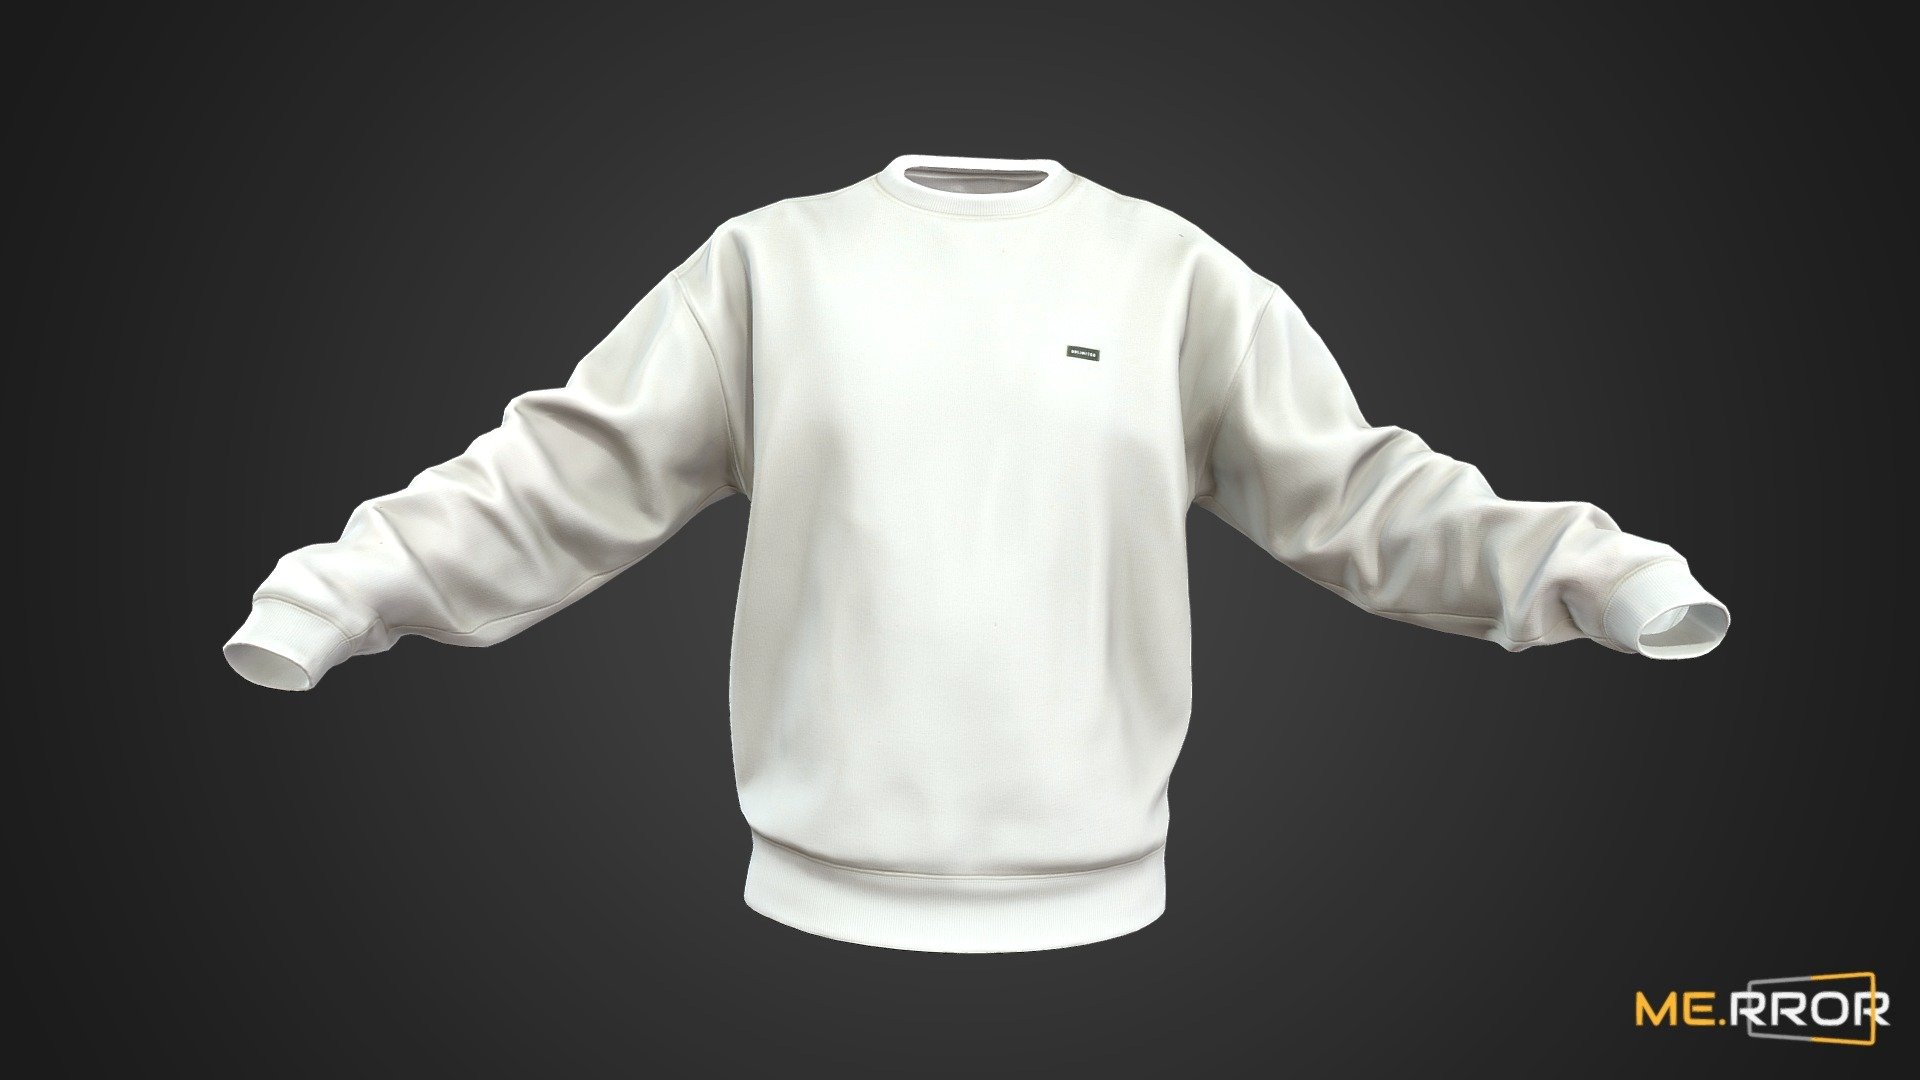 MERROR is a 3D Content PLATFORM which introduces various Asian assets to the 3D world


3DScanning #Photogrametry #ME.RROR - [Game-Ready] Ivory Sweatshirt - Buy Royalty Free 3D model by ME.RROR Studio (@merror) 3d model